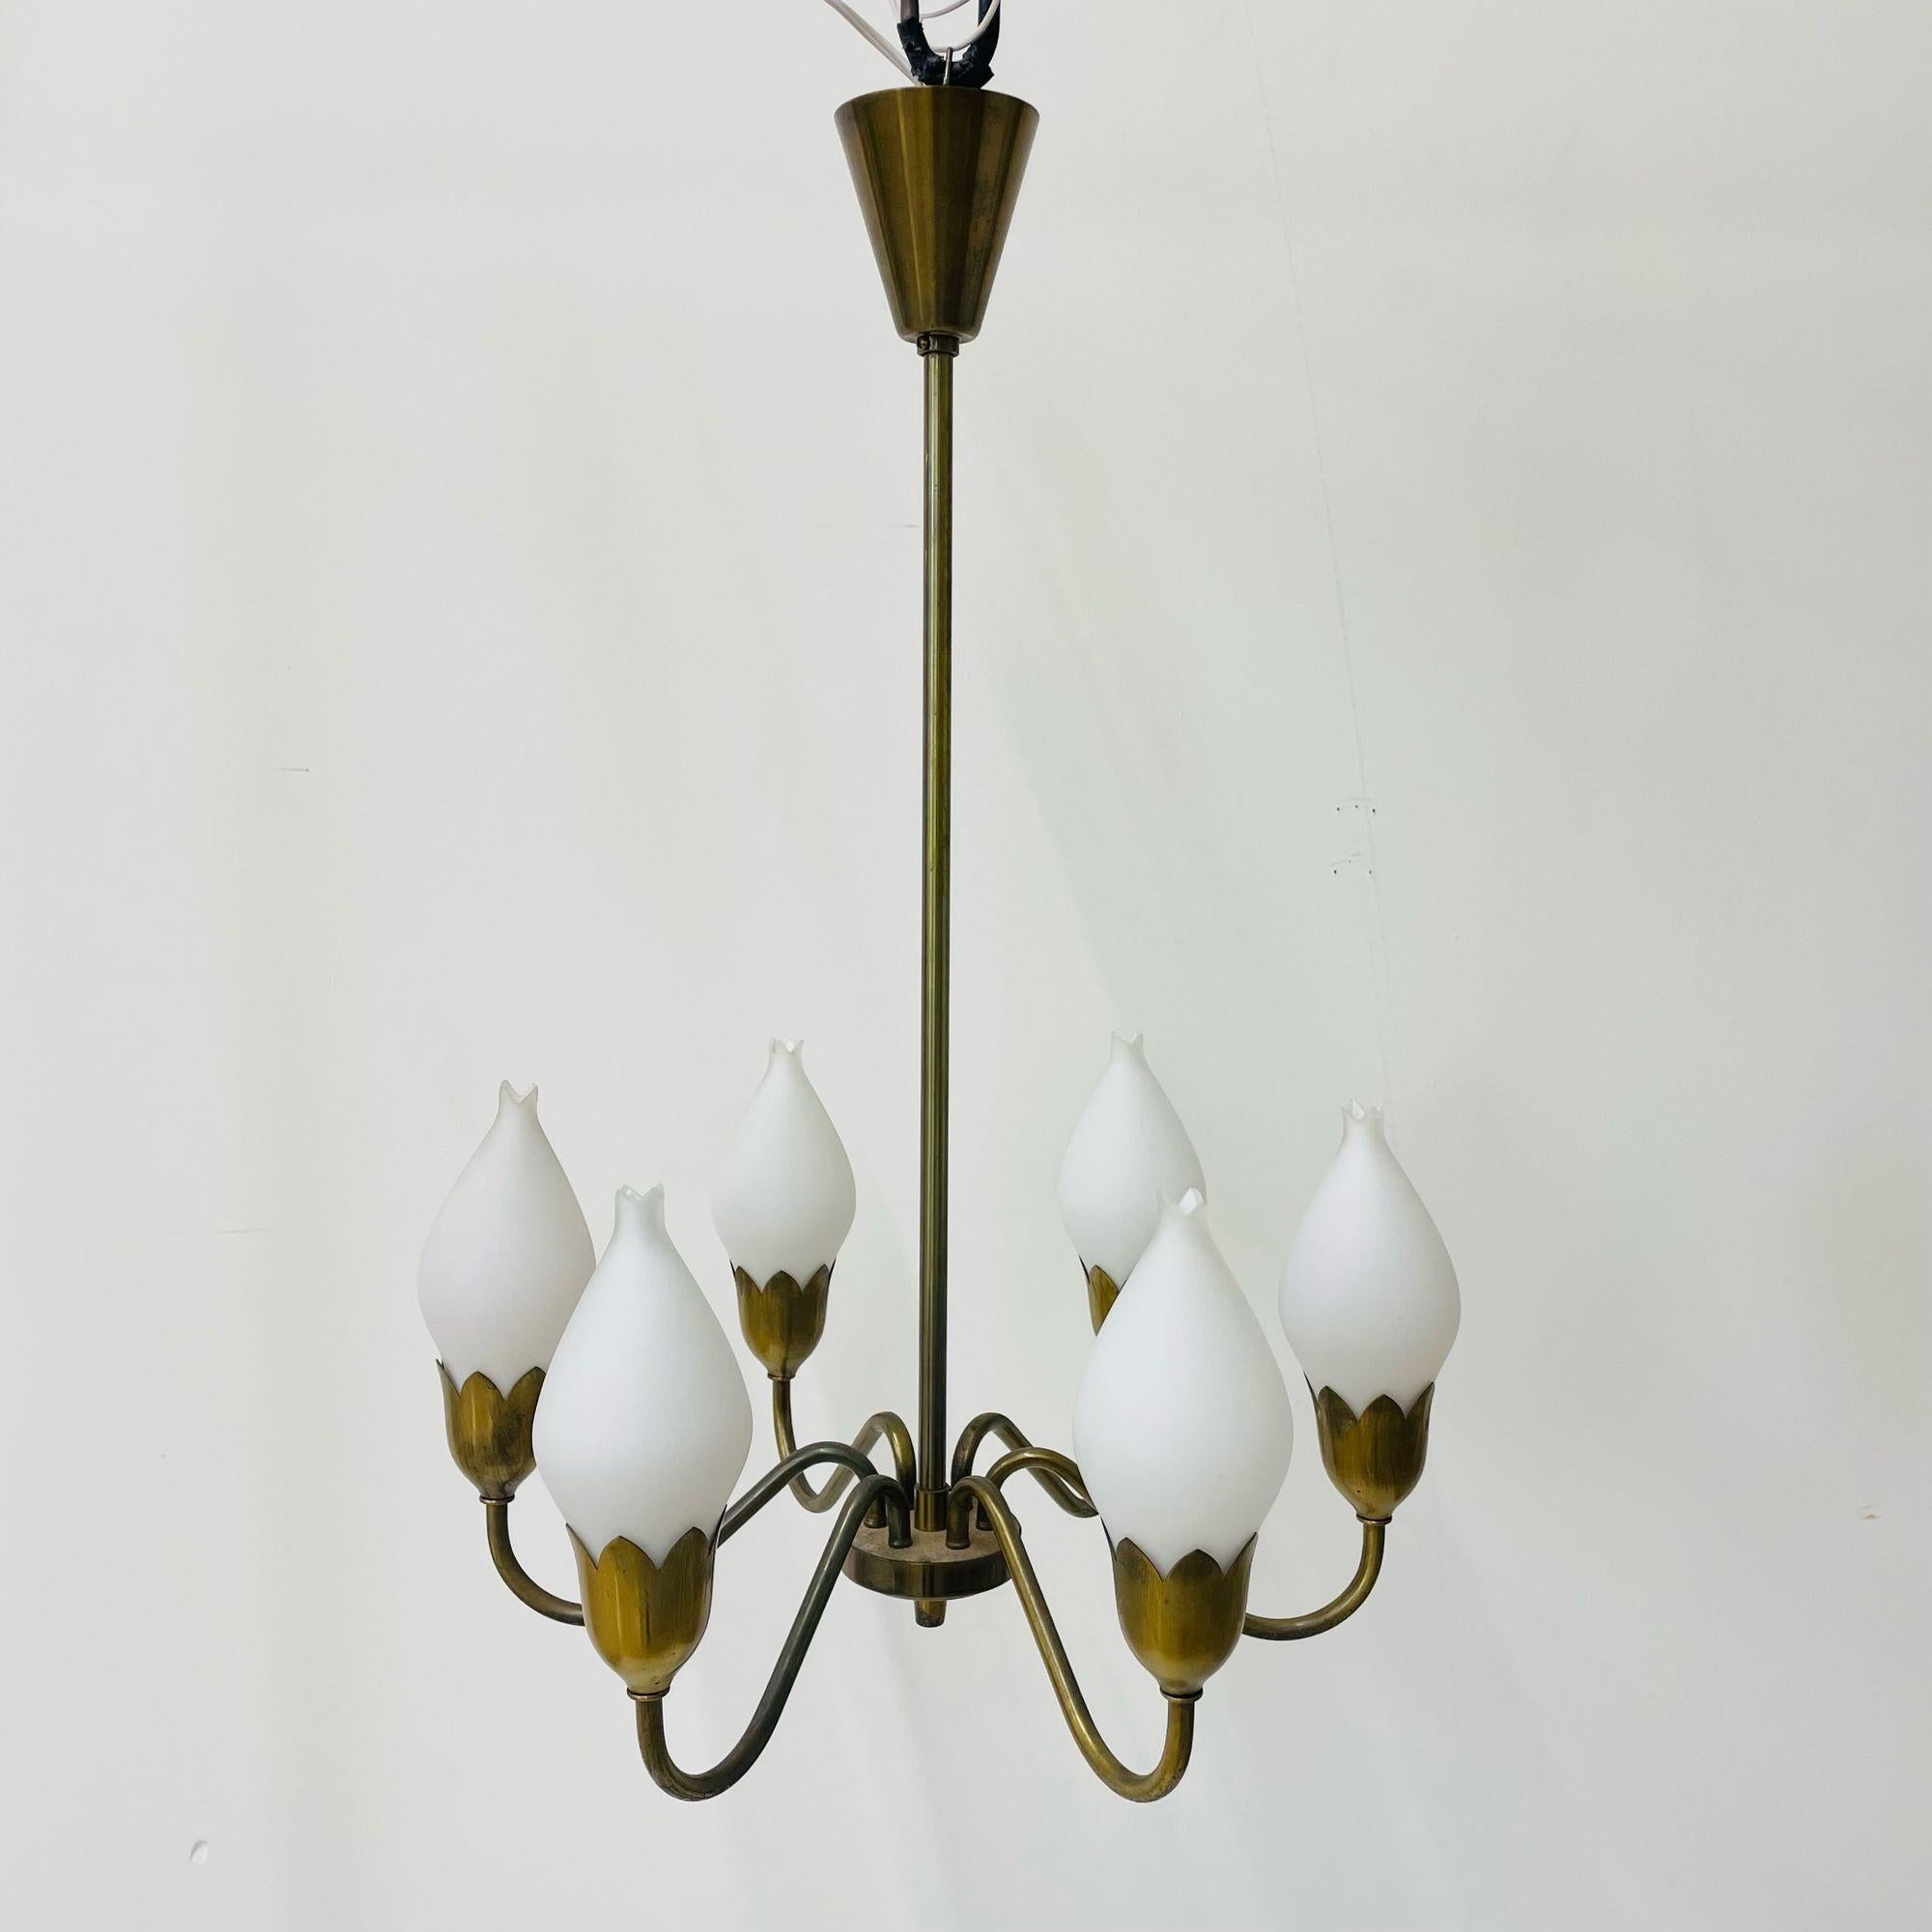 Mid-20th Century Pair of Danish Mid-Century Modern Tulip Form Chandeliers / Pendants, Opal Glass For Sale